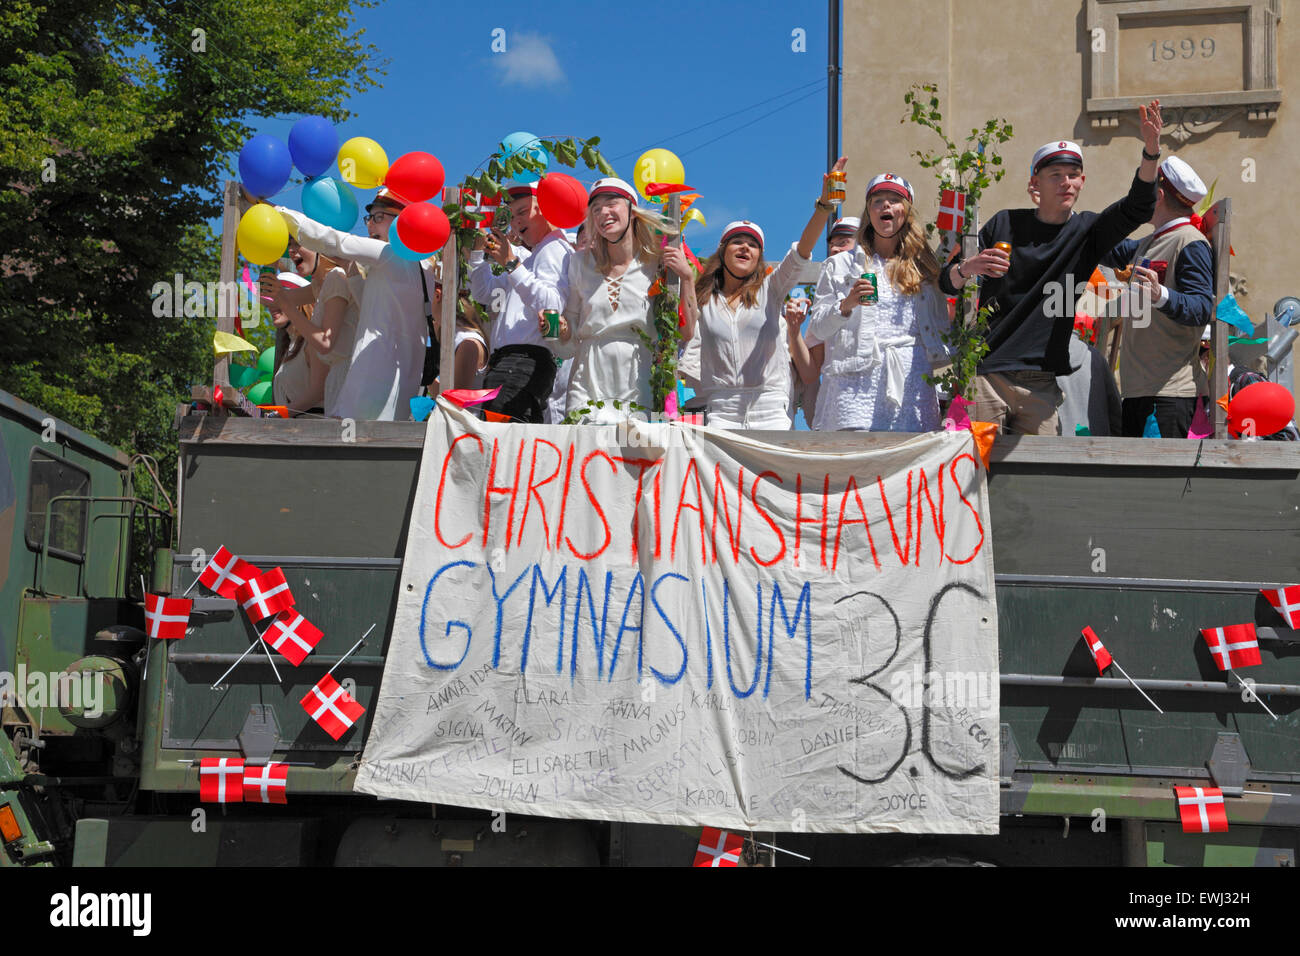 Christianshavn, Copenhagen, Denmark. June 26, 2015. Danish students celebrate their high school, grammar school graduation. Students from Christianshavns Gymnasium (high school) have just started on the traditional, long, exhausting and high-spirited truck tour of celebration visiting each student’s   home for refreshments. Credit:  Niels Quist/Alamy Live News Stock Photo